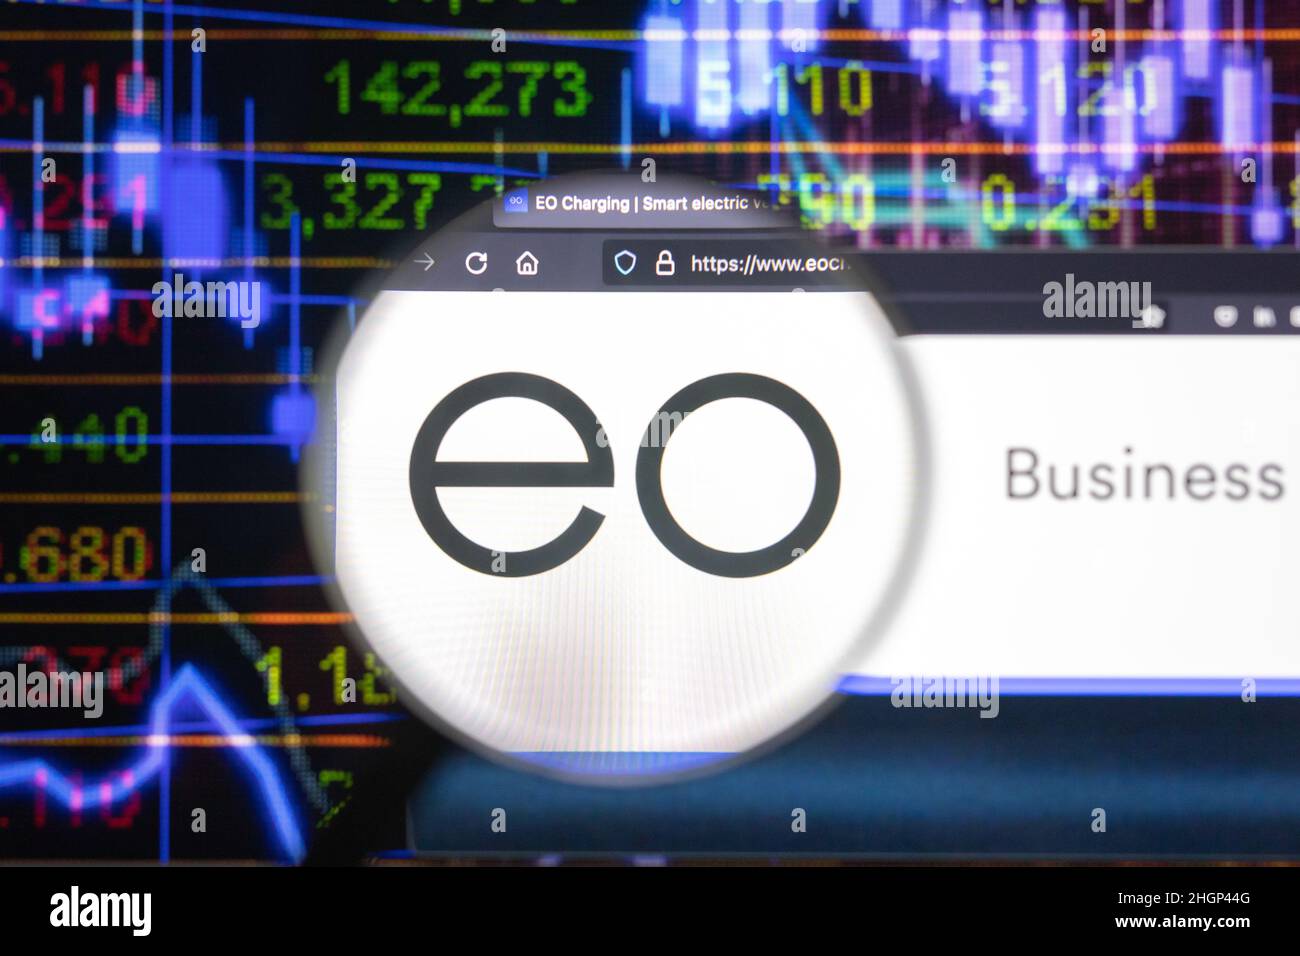 EO company logo on a website with blurry stock market developments in the background, seen on a computer screen through a magnifying glass. Stock Photo